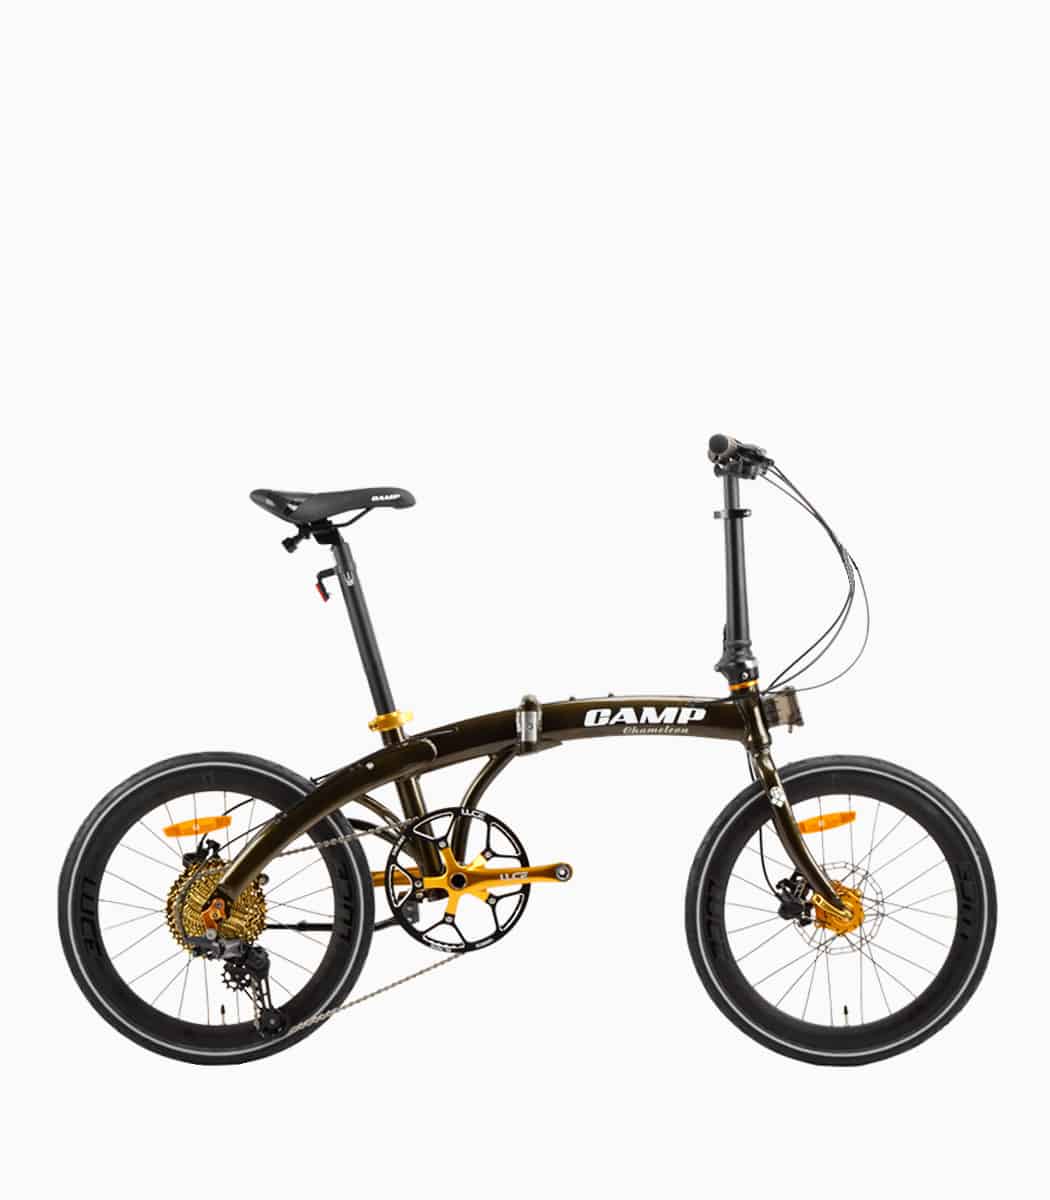 CAMP Chameleon GT (BLACK GOLD) foldable bicycle right